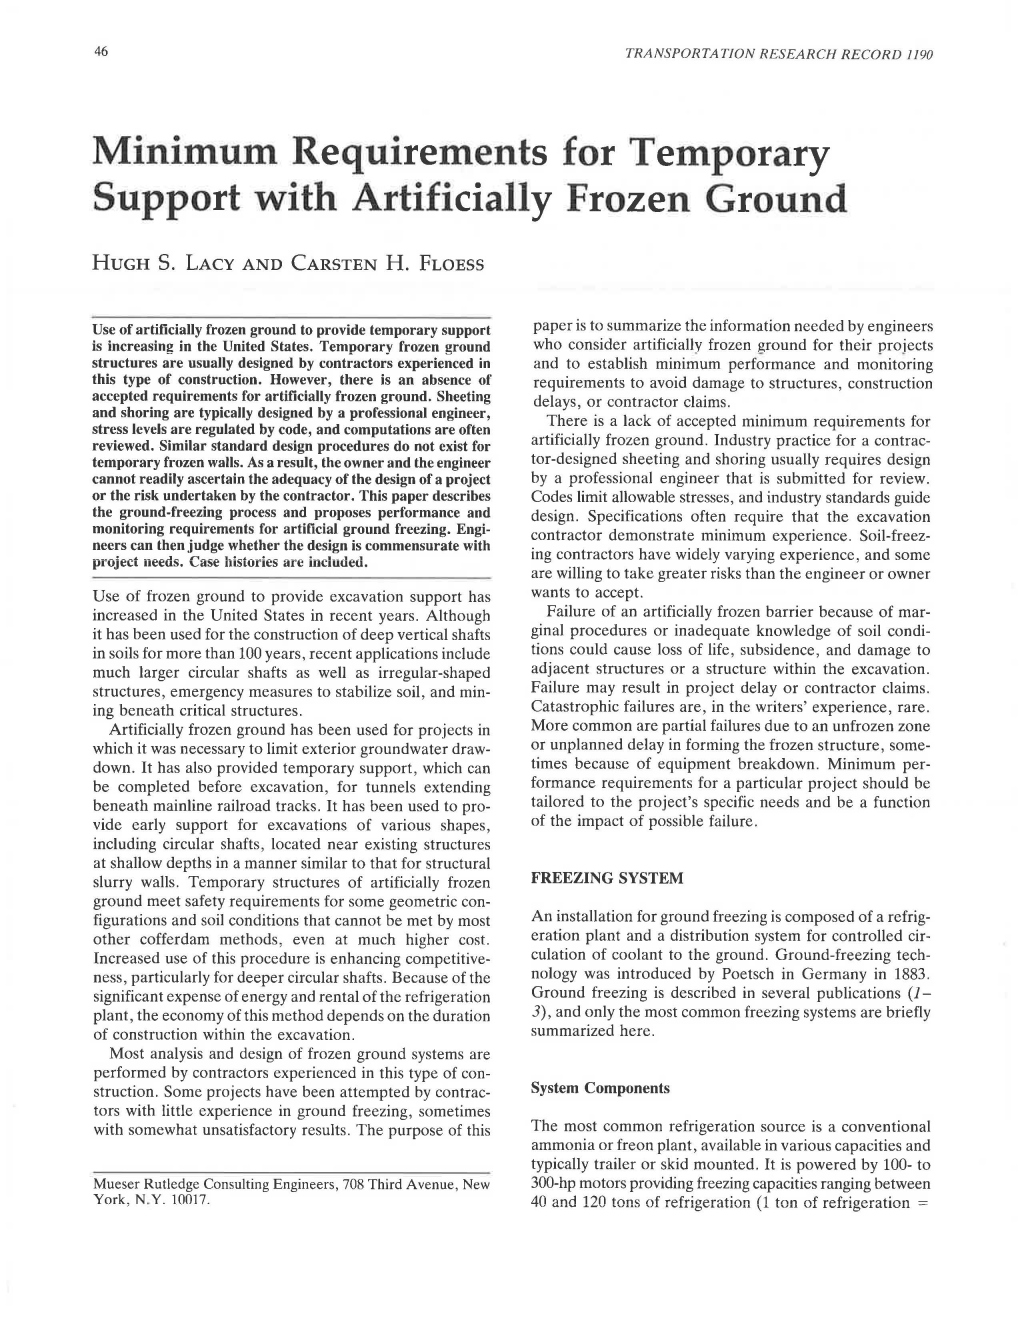 Minimum Requirements for Temporary Support with Artificially Frozen Ground